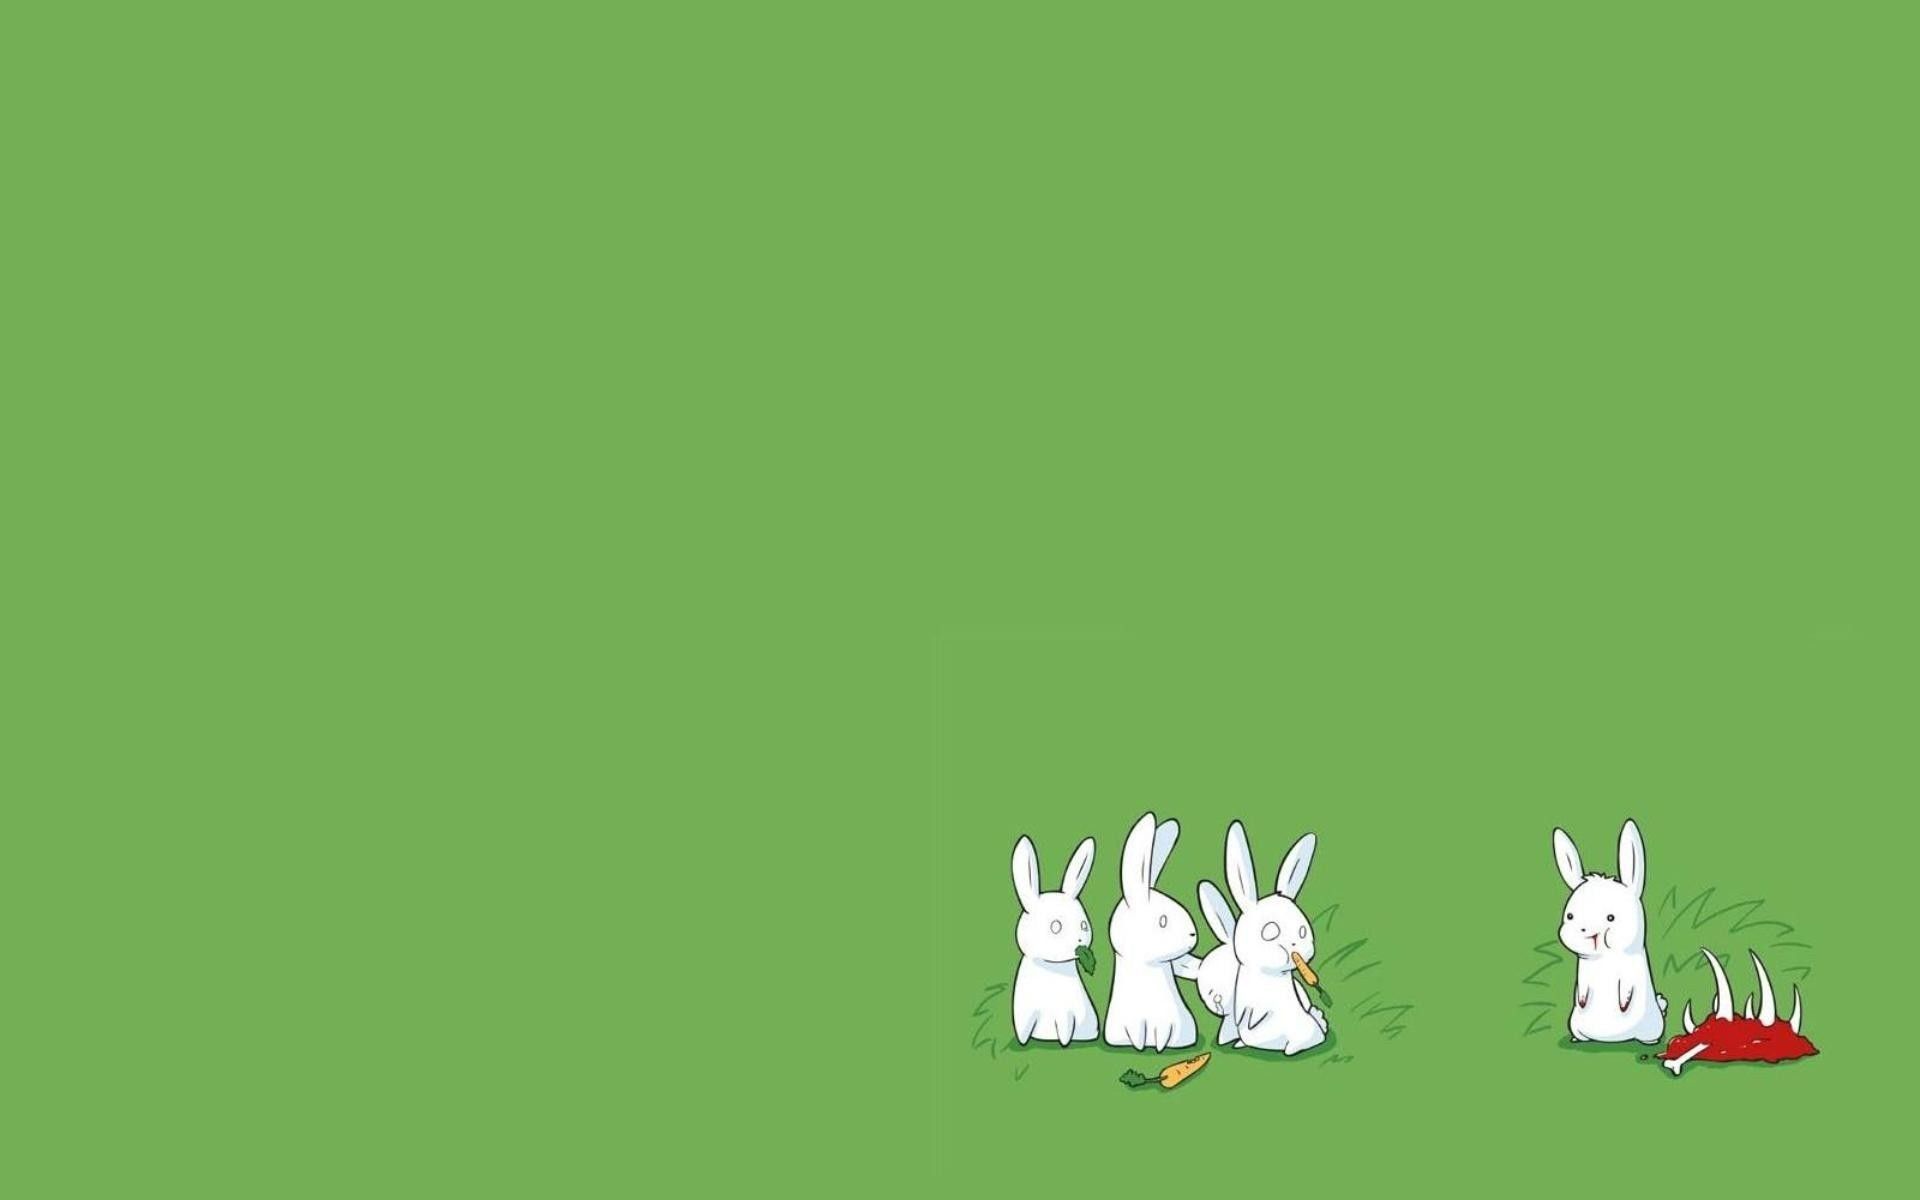 A group of rabbits on a green background - Simple